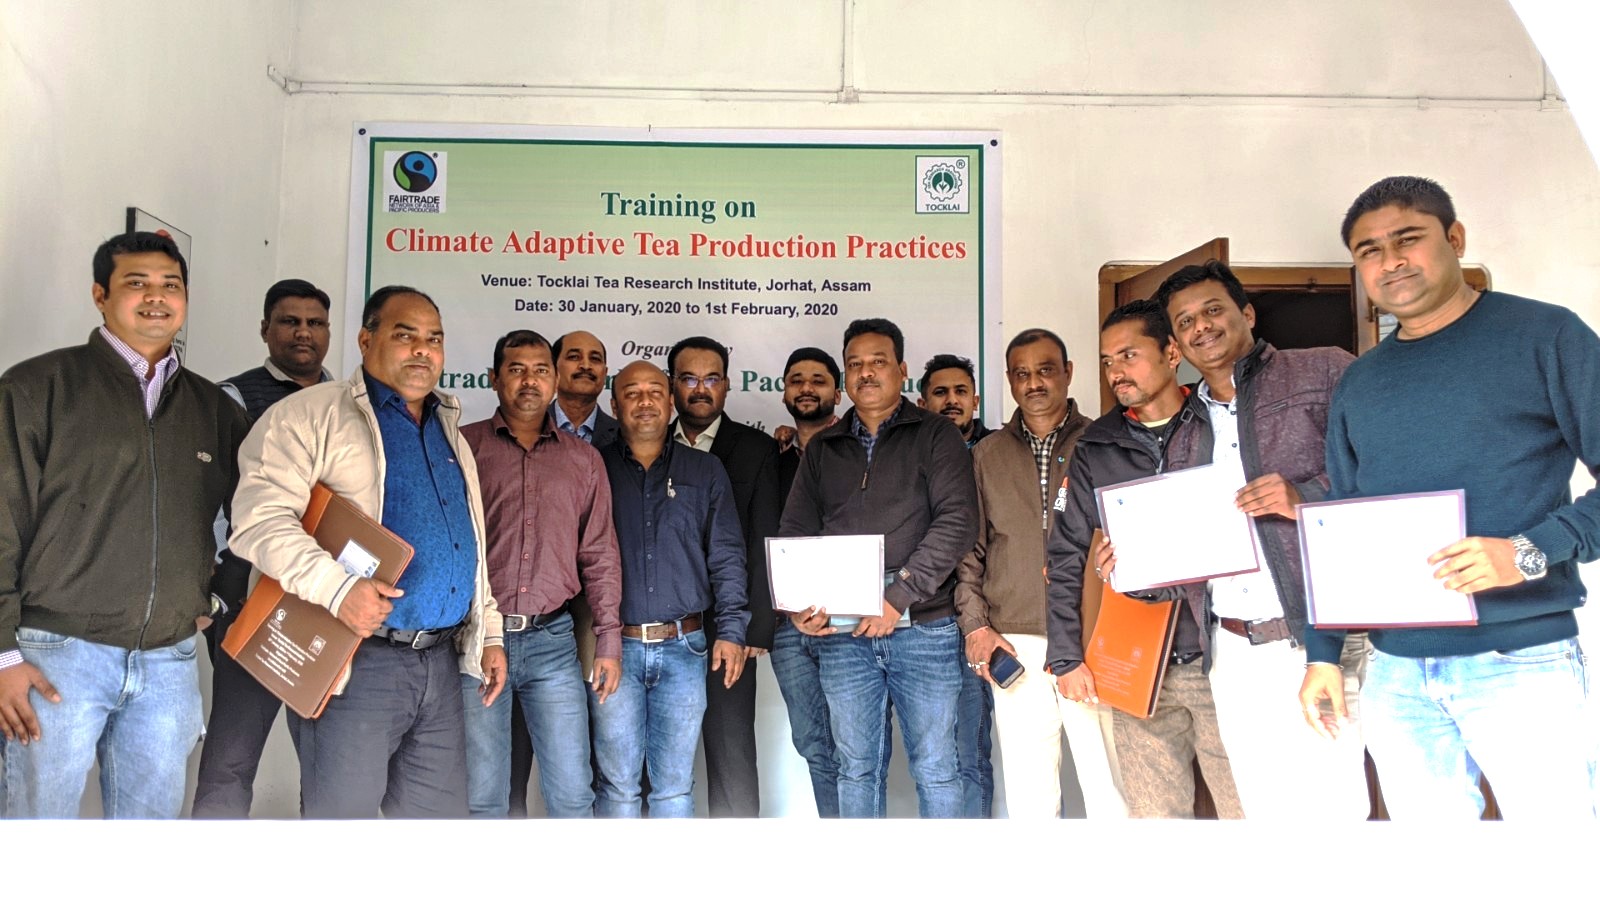 Training on Climate Adaptive Tea Production Practices in Assam, India  ‘The way to Climate Change Mitigation’